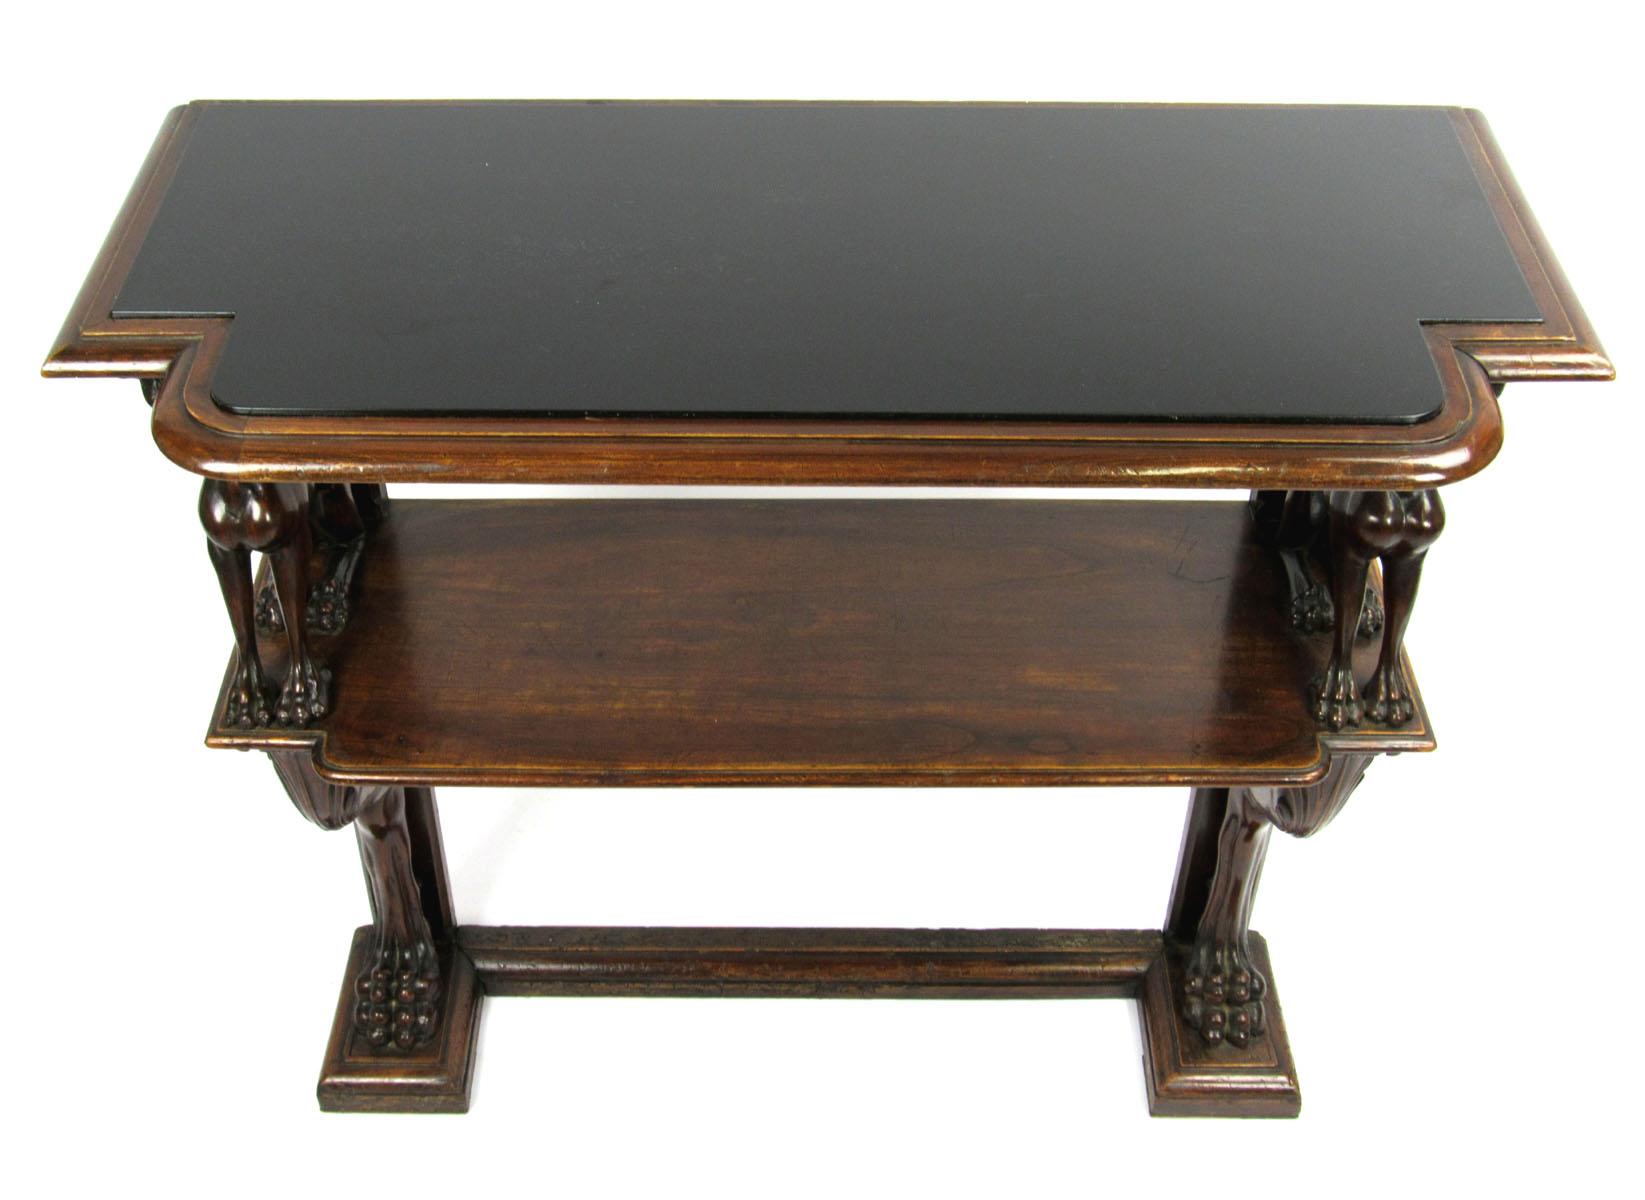 Late 19th century English mahogany console server with ebonized top above gryphon supports on the upper shelf and lion's legs with carved floral on the hip on the lower supports.